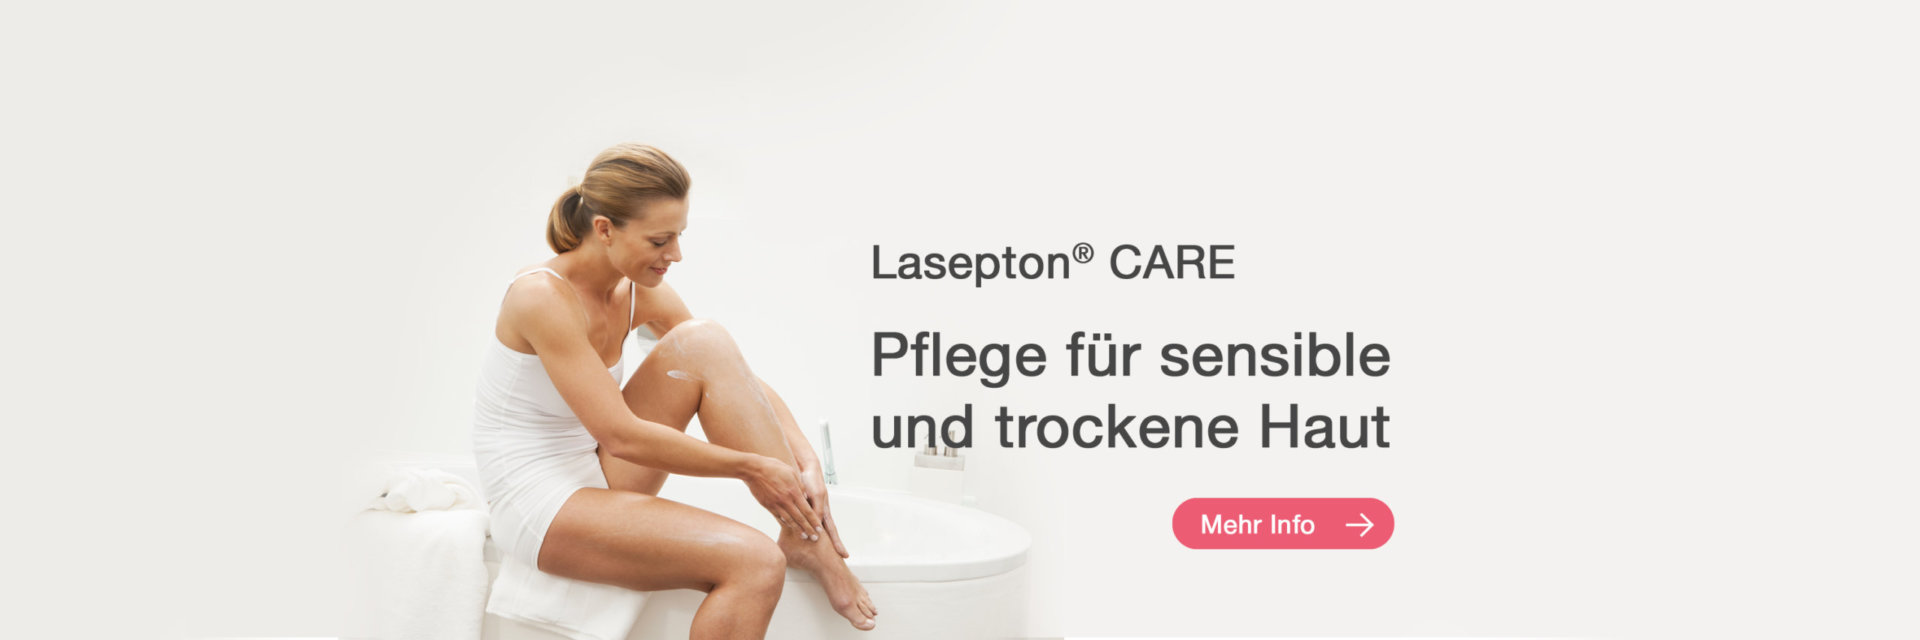 Lasepton® CARE